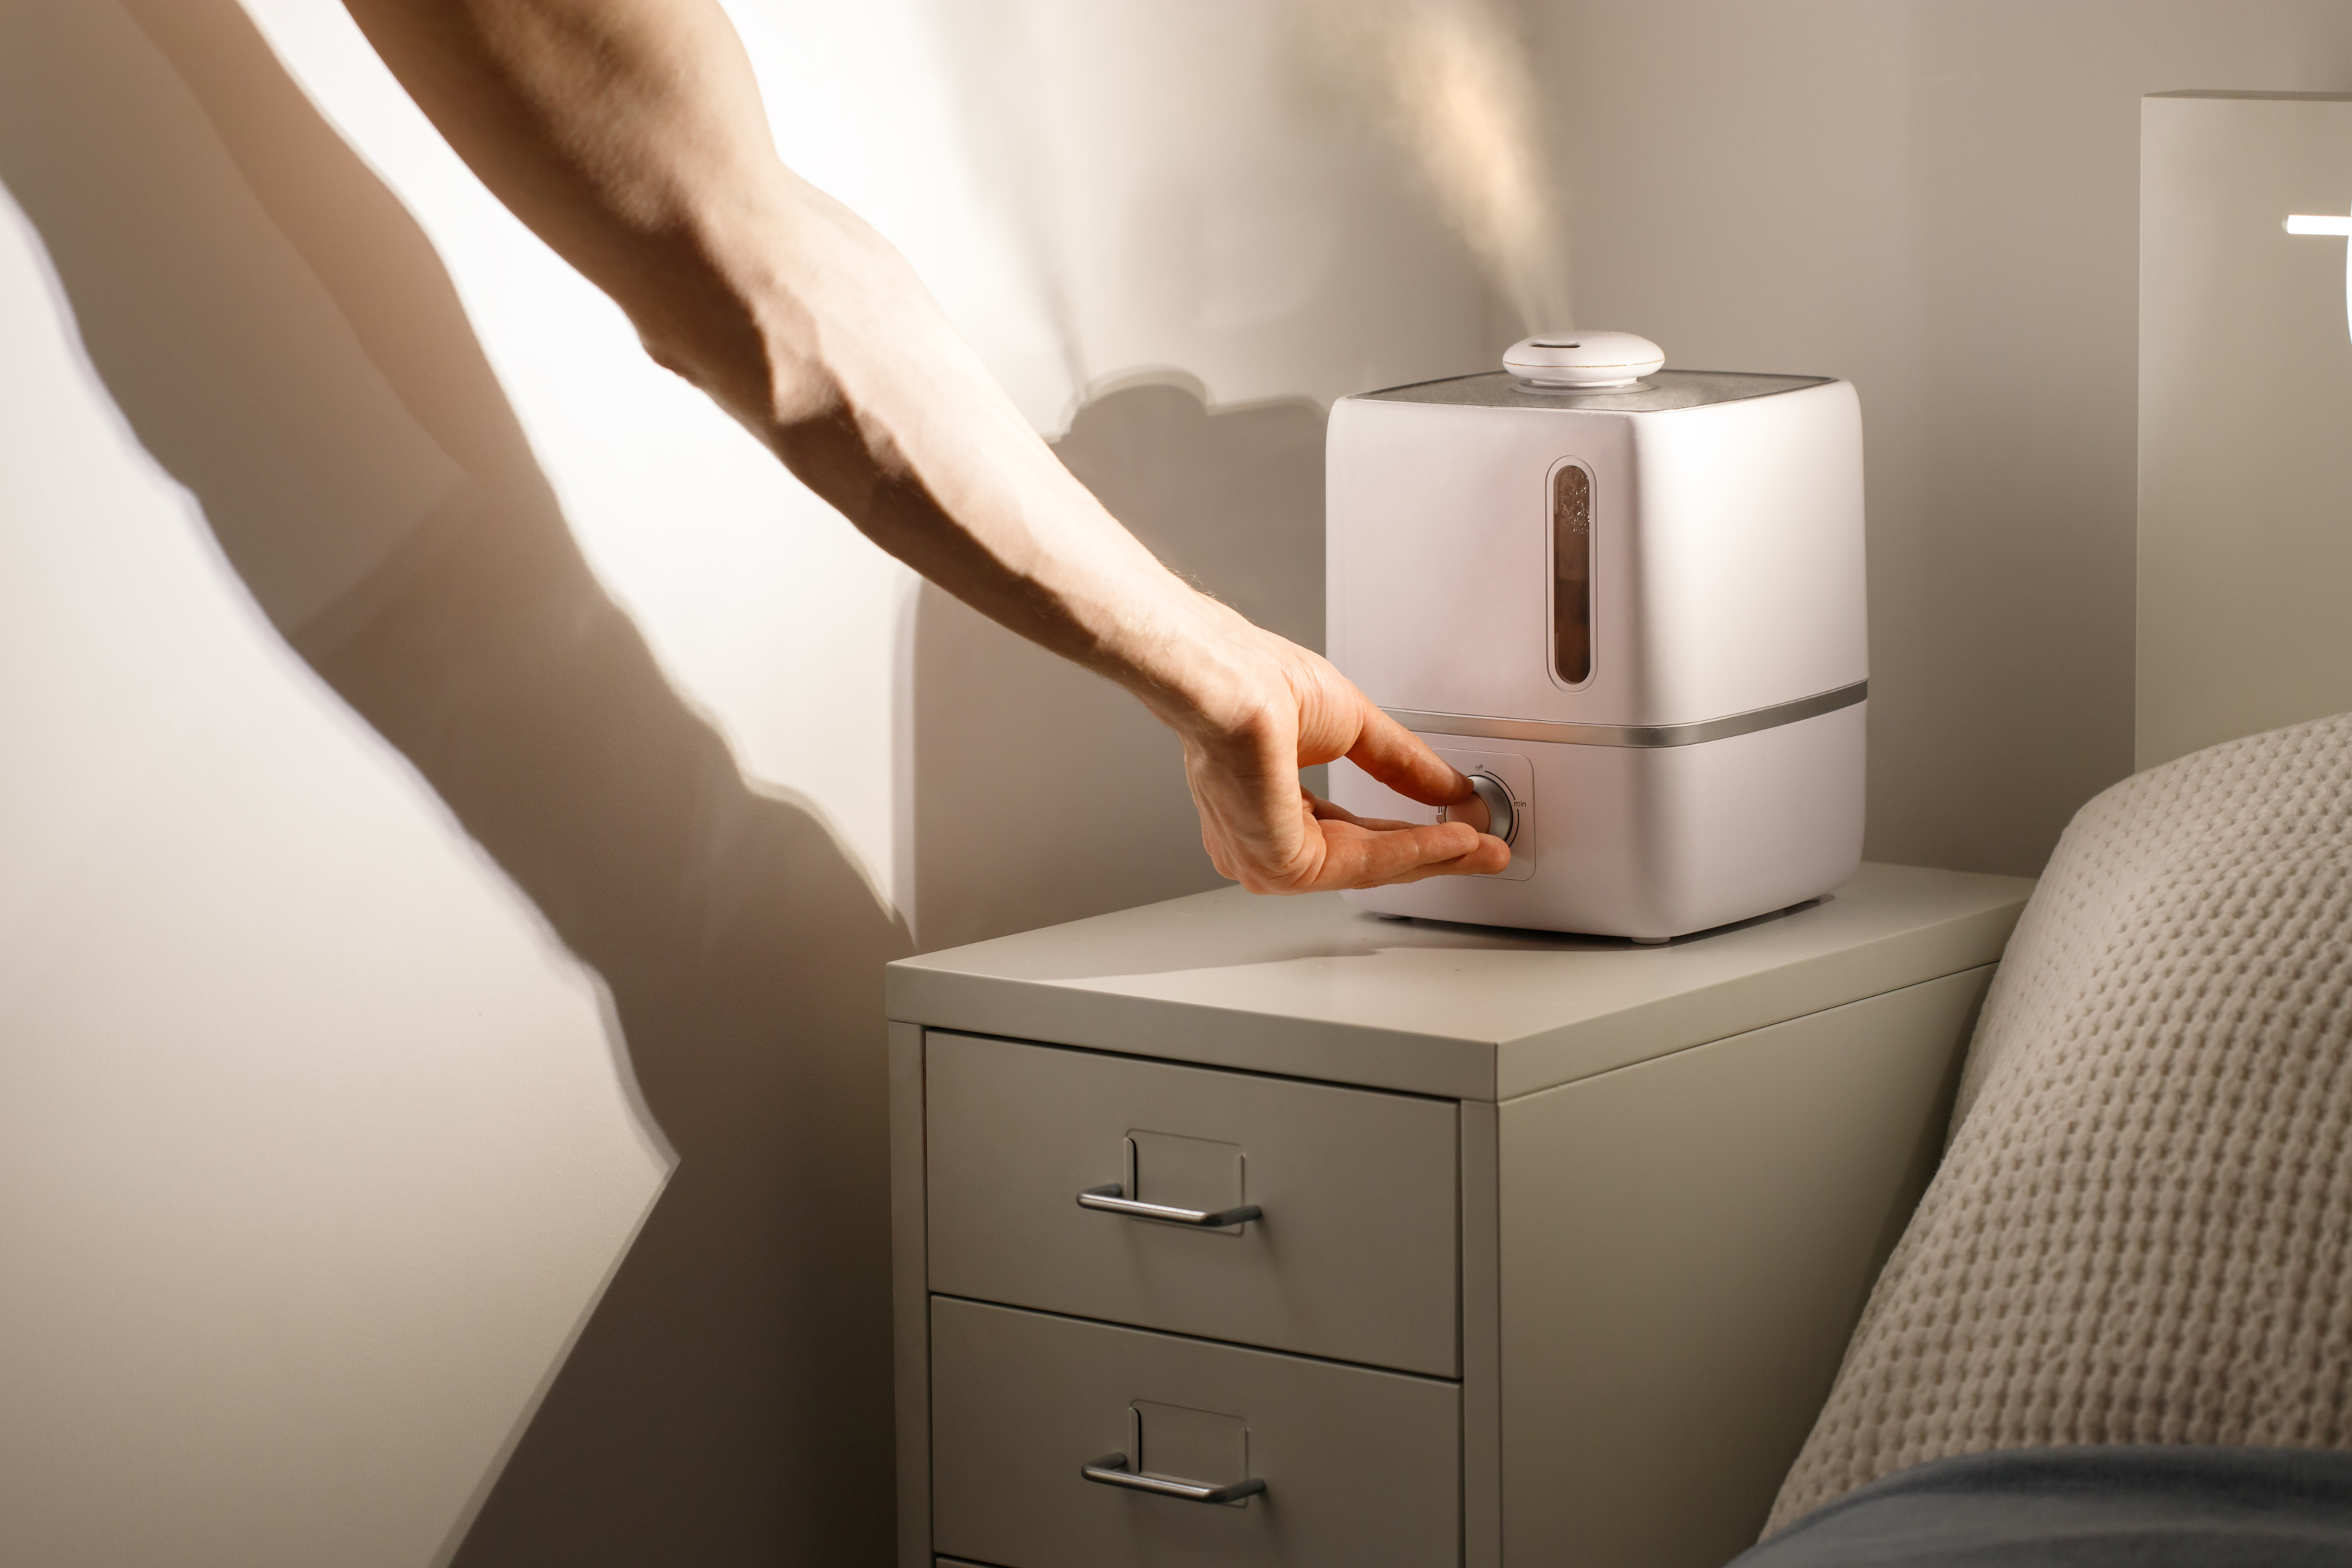 An image of a hand andjusting the steam of the humidifier in a room.